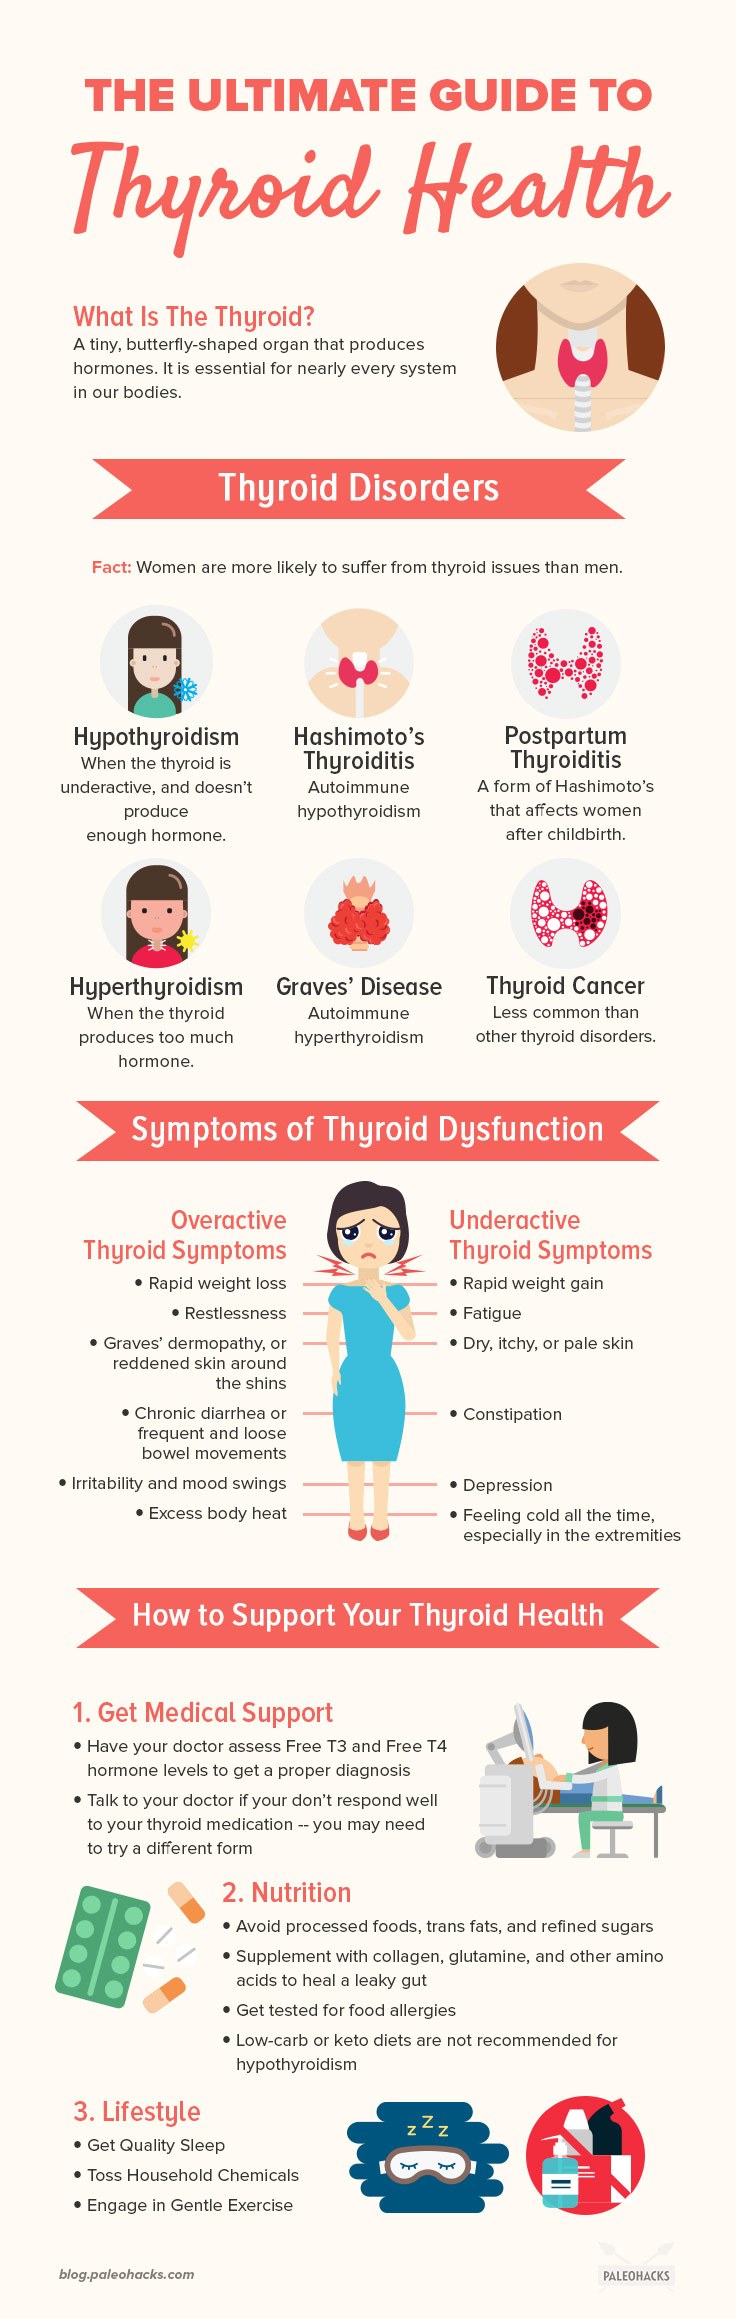 The thyroid is essential for nearly every system in our bodies, but most people don’t give that tiny, butterfly-shaped organ any thought unless it’s causing problems.